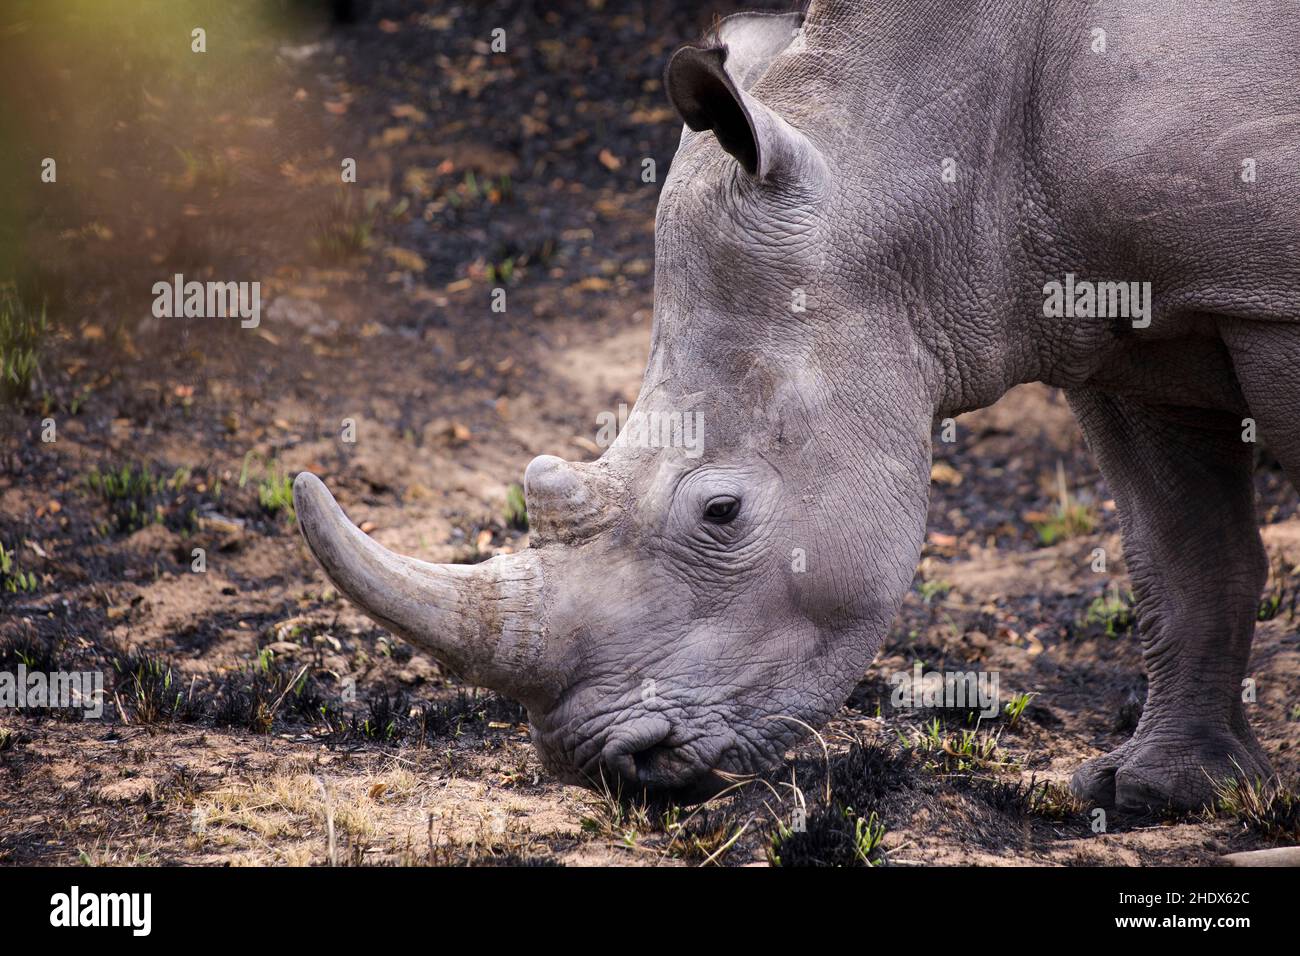 A close-up of a White rhinoceros, side profile of his head. Stock Photo